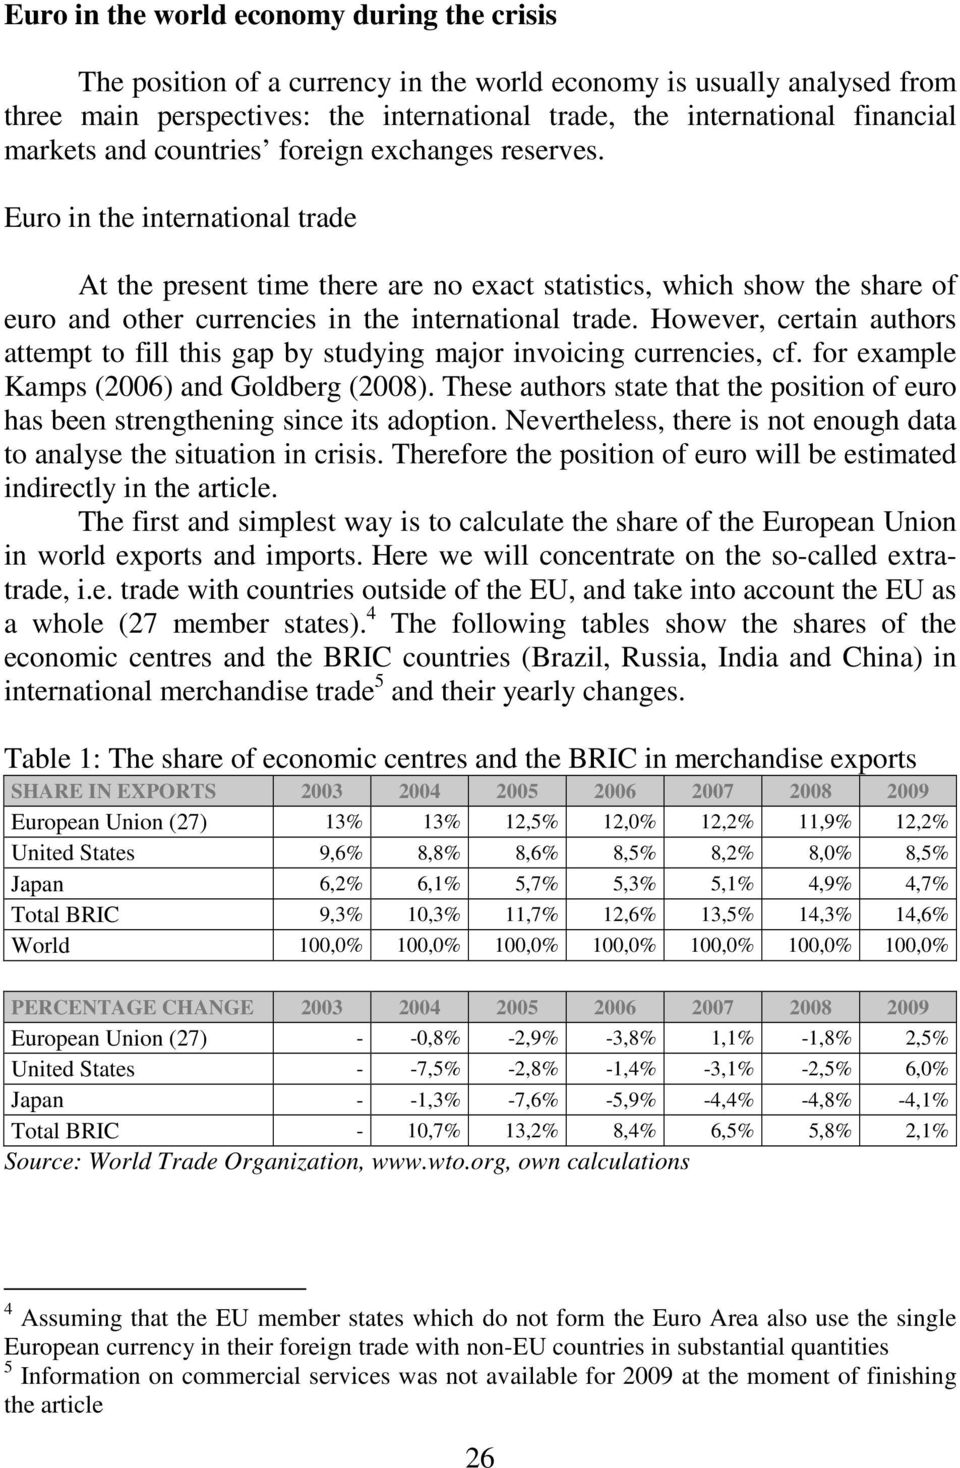 Euro in the international trade At the present time there are no exact statistics, which show the share of euro and other currencies in the international trade.